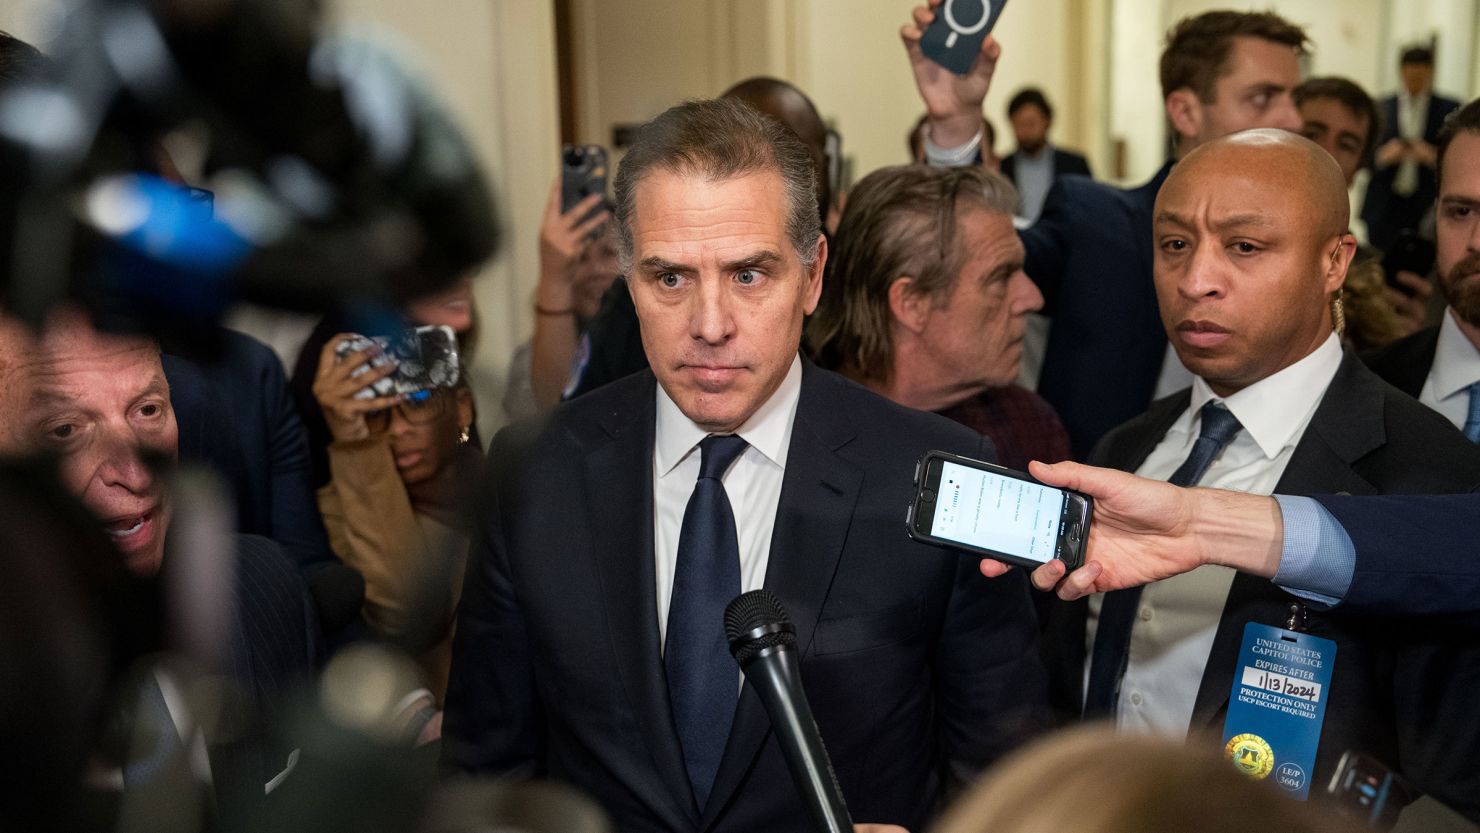 Hunter Biden departs a House Oversight Committee meeting at Capitol Hill on January 10 in Washington, DC.